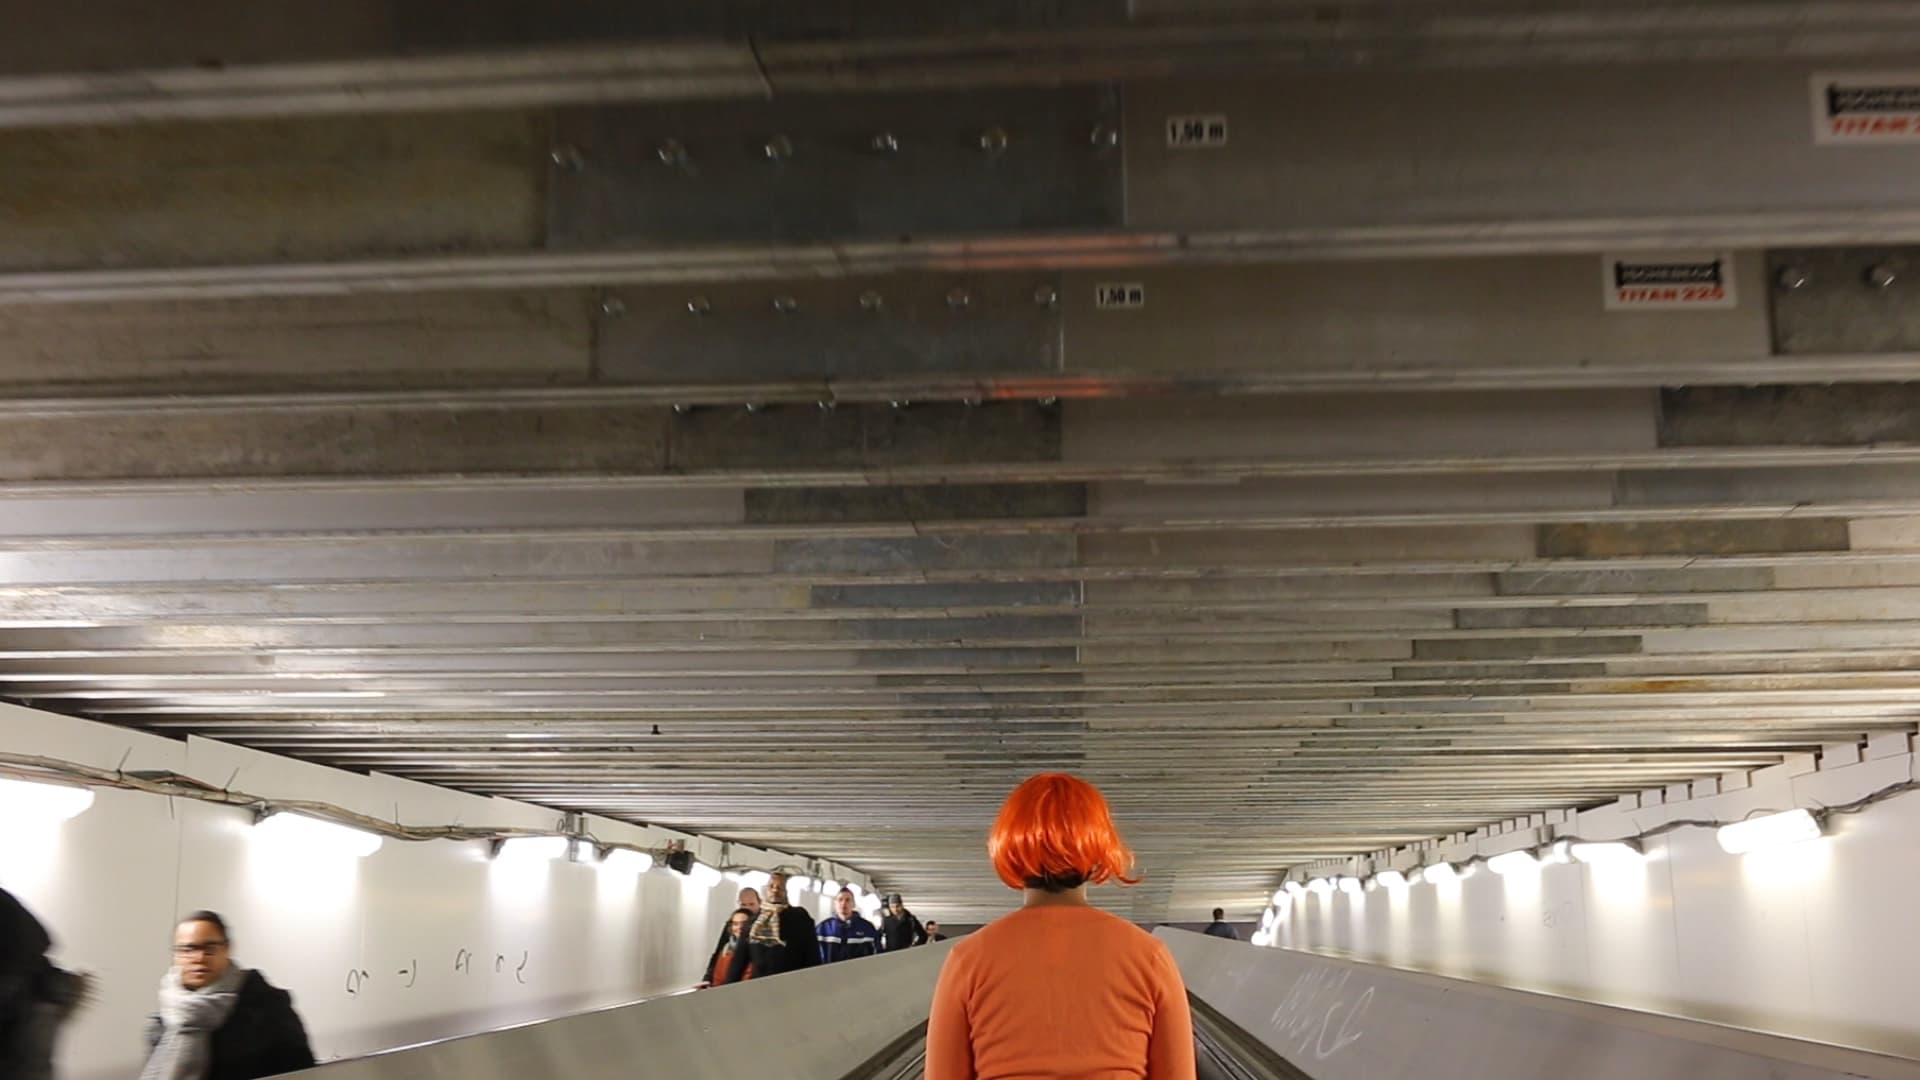 Still from the film Network/Intersect, by Ollie Palmer. The image depicts a person wearing an orange wig on an escalator.